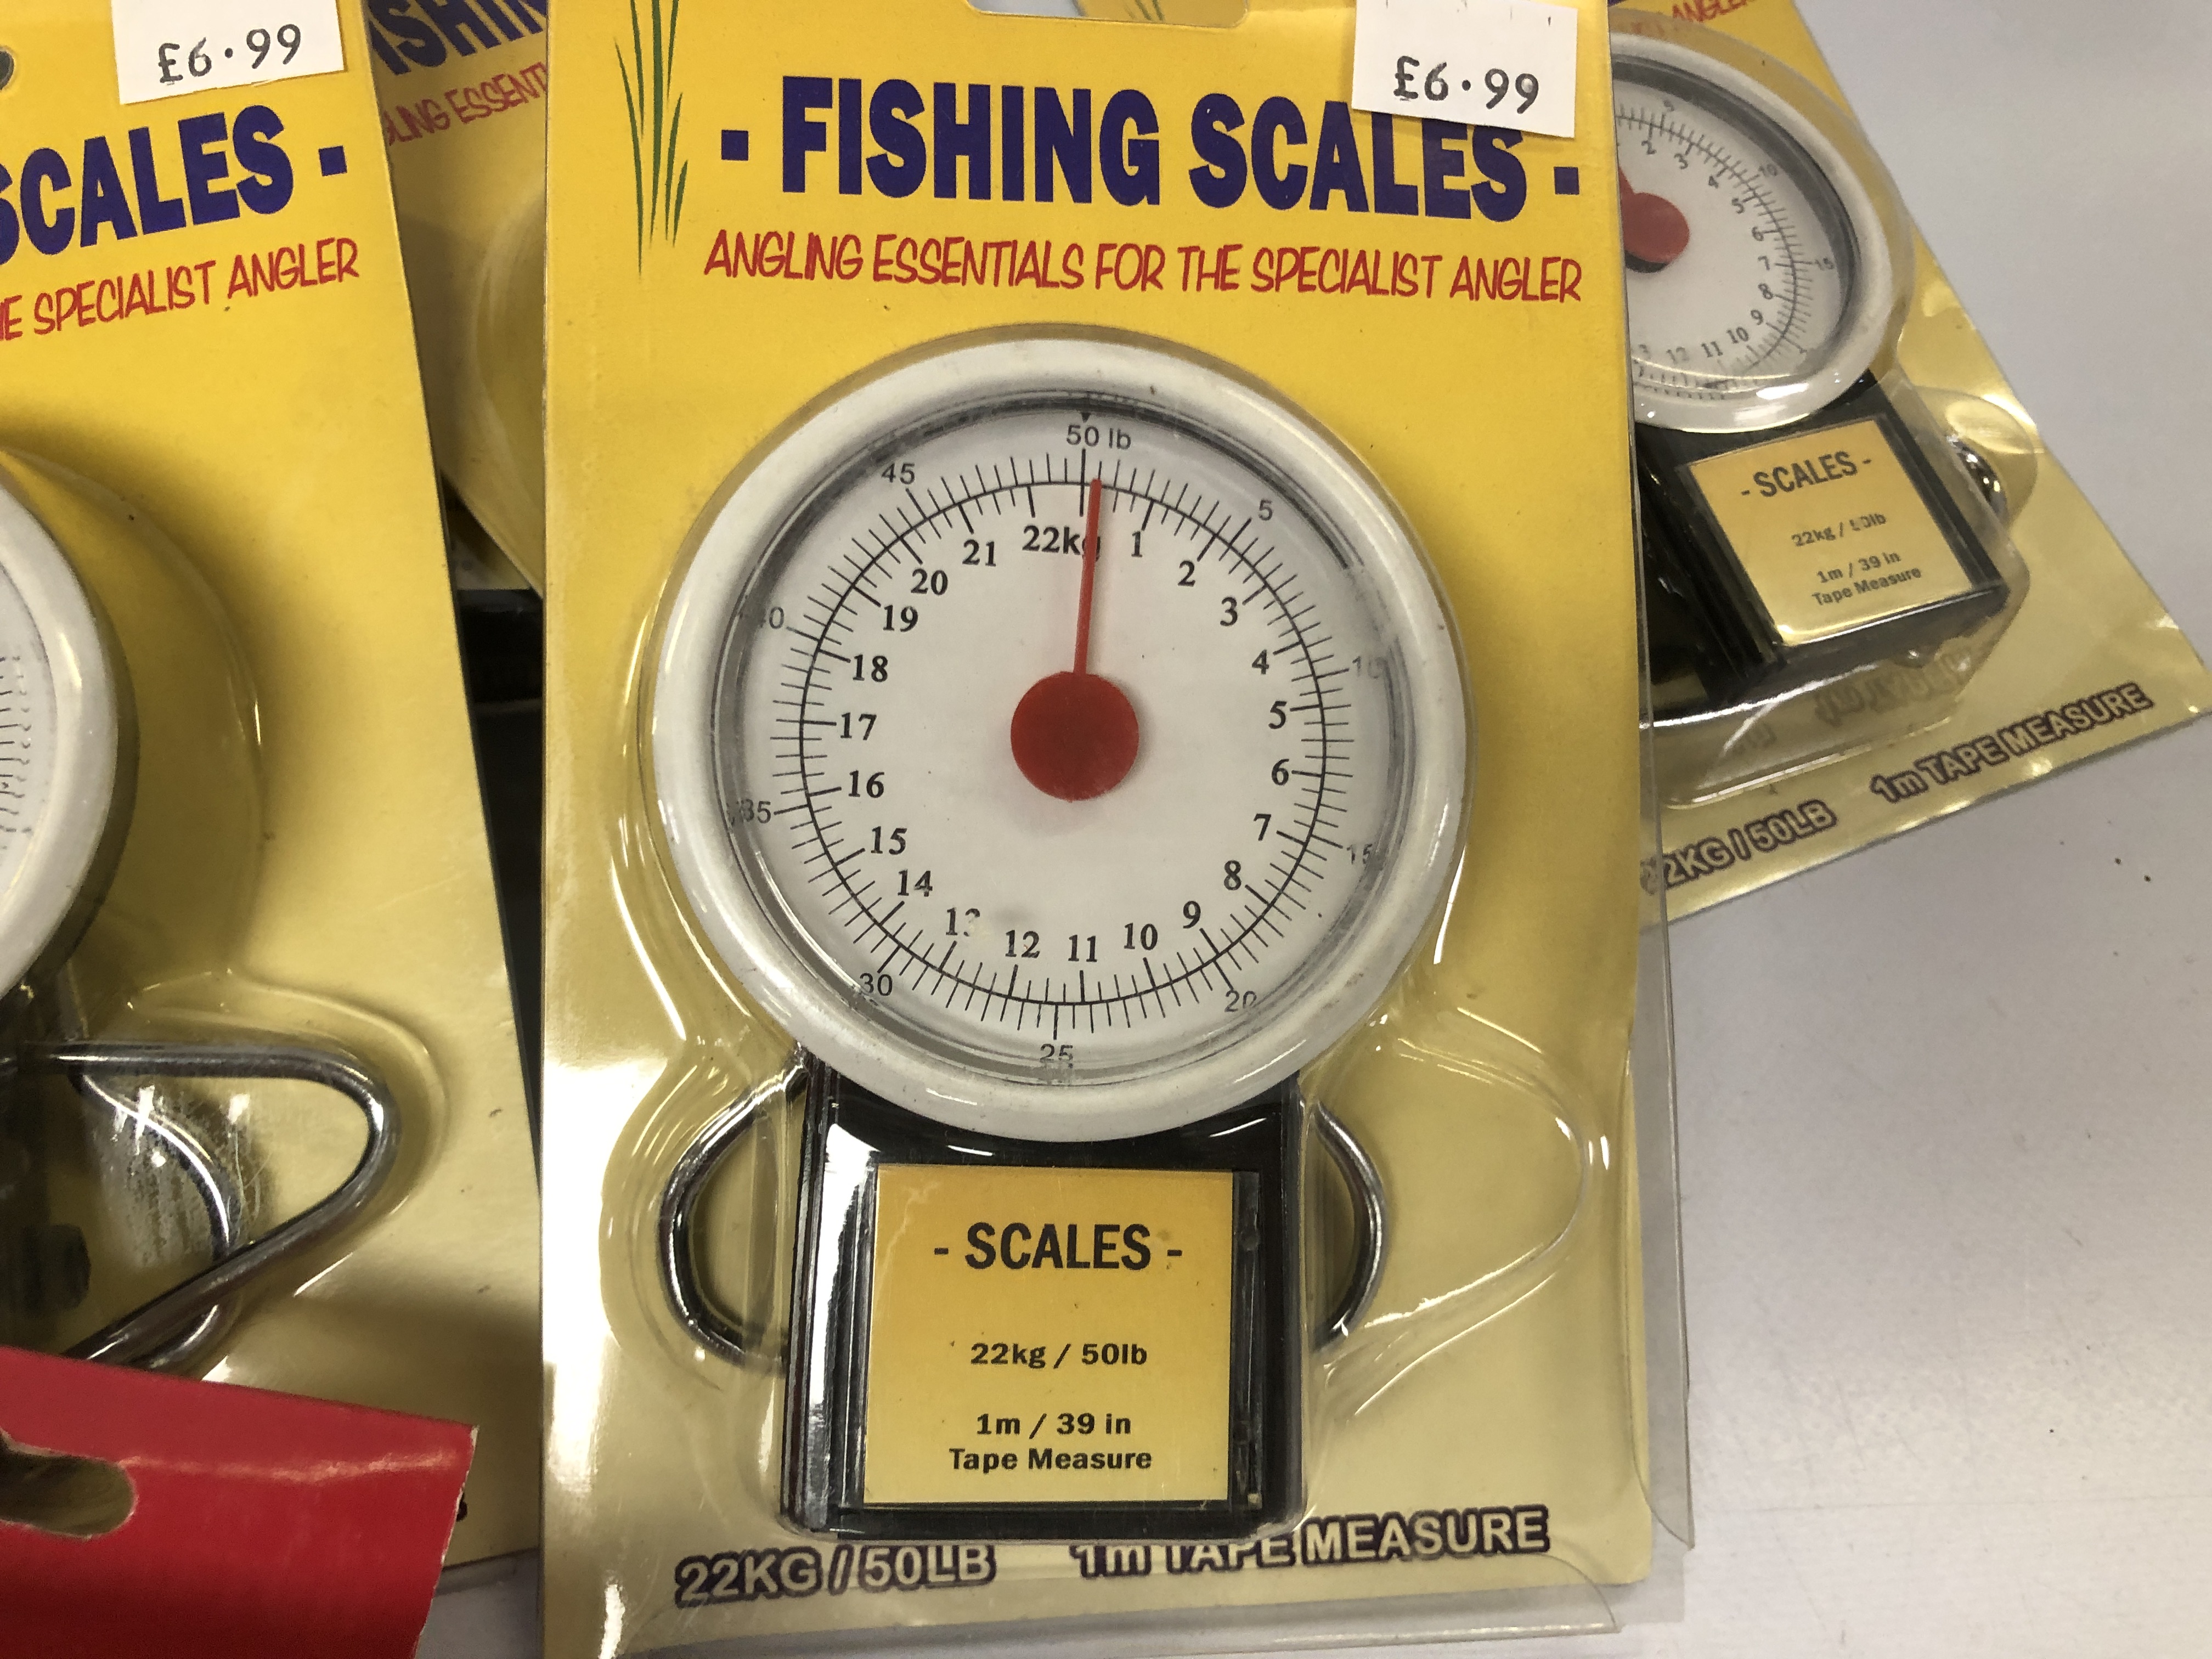 PACKAGED AS NEW 10 FISHING SCALES AND 2 MICROWEIGH SCALES ALONG WITH 5 WEIGHING SLINGS - Image 2 of 4